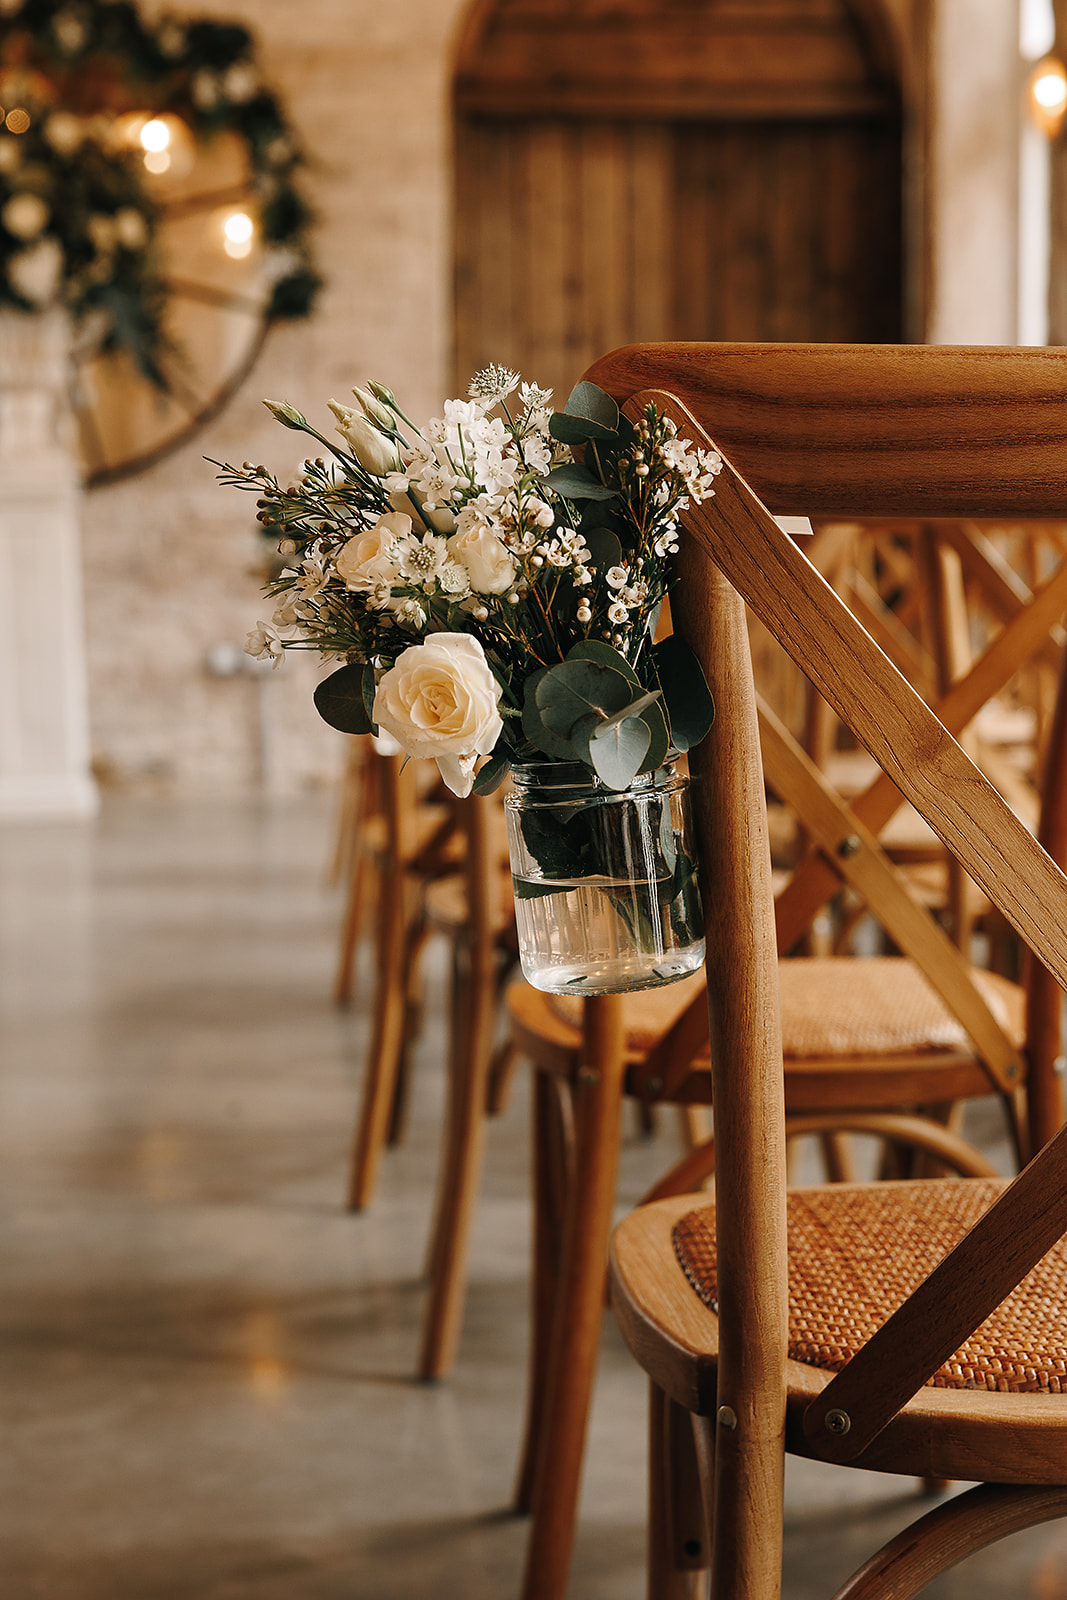 A close up view of a pew end hanging from the end of a wooden chair consisting of a jam jar filled with white roses, wax flower and lisianthus